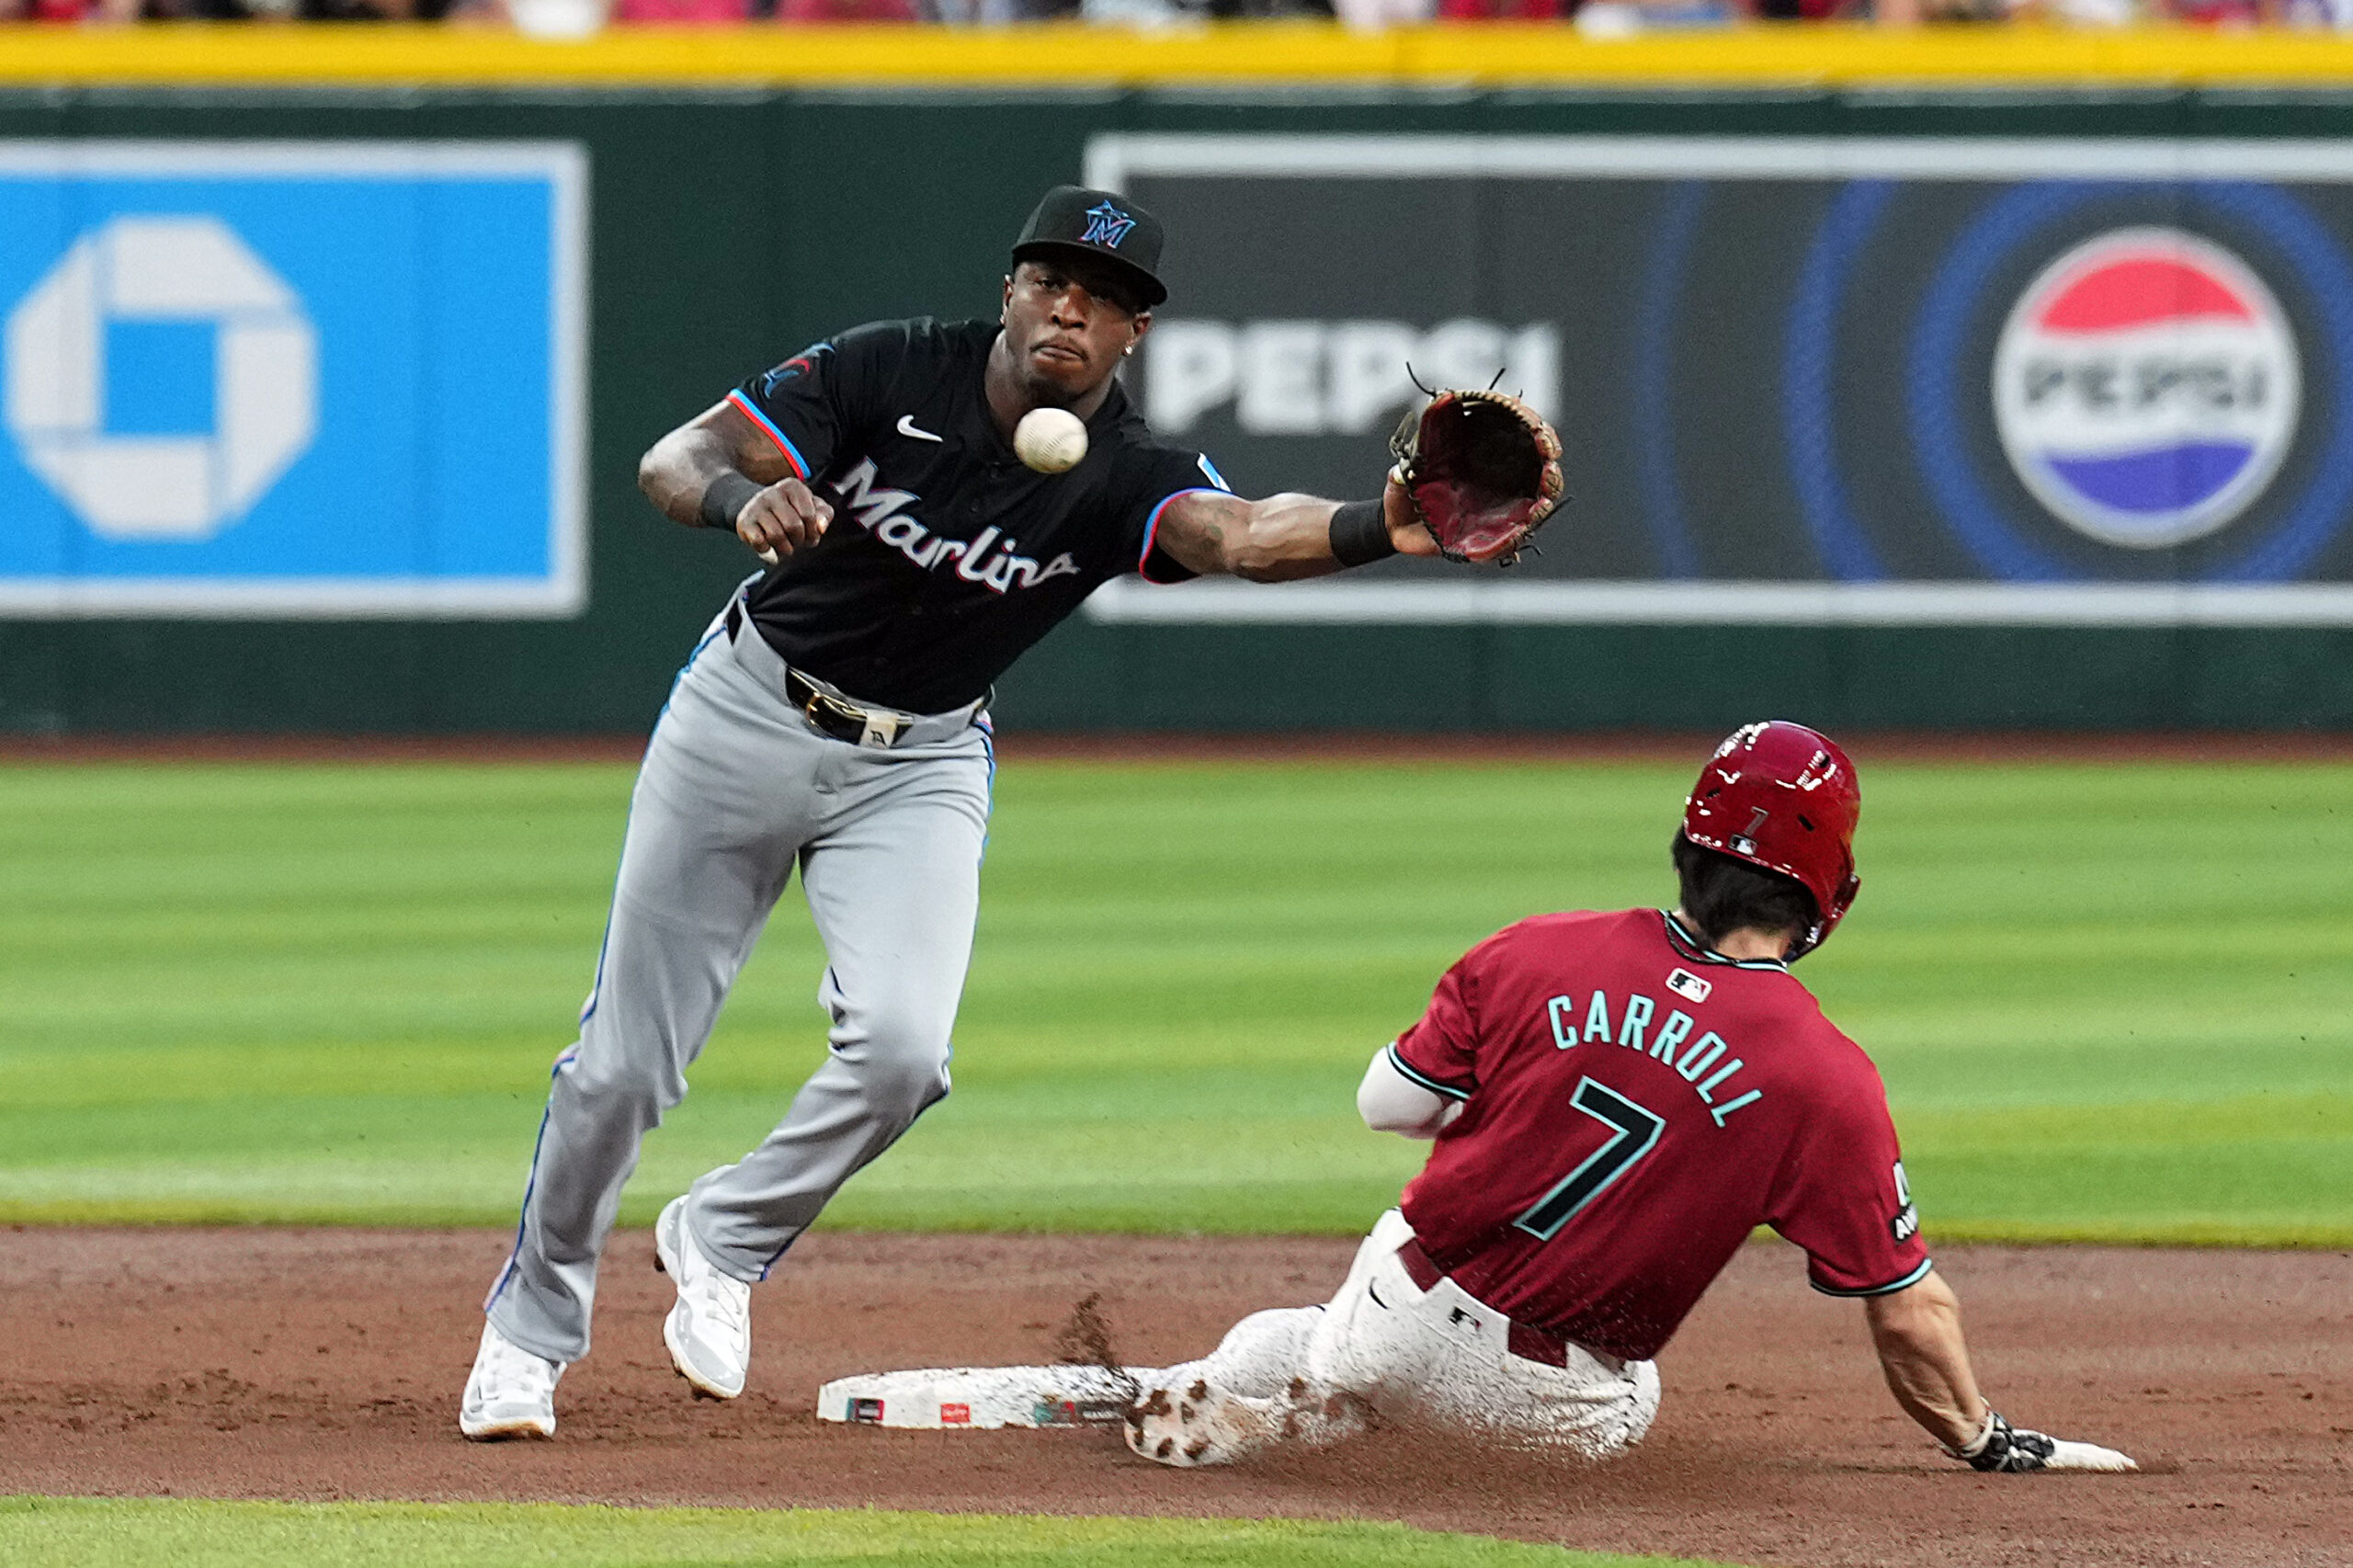 The Miami Marlins placed Tim Anderson on the Bereavement List